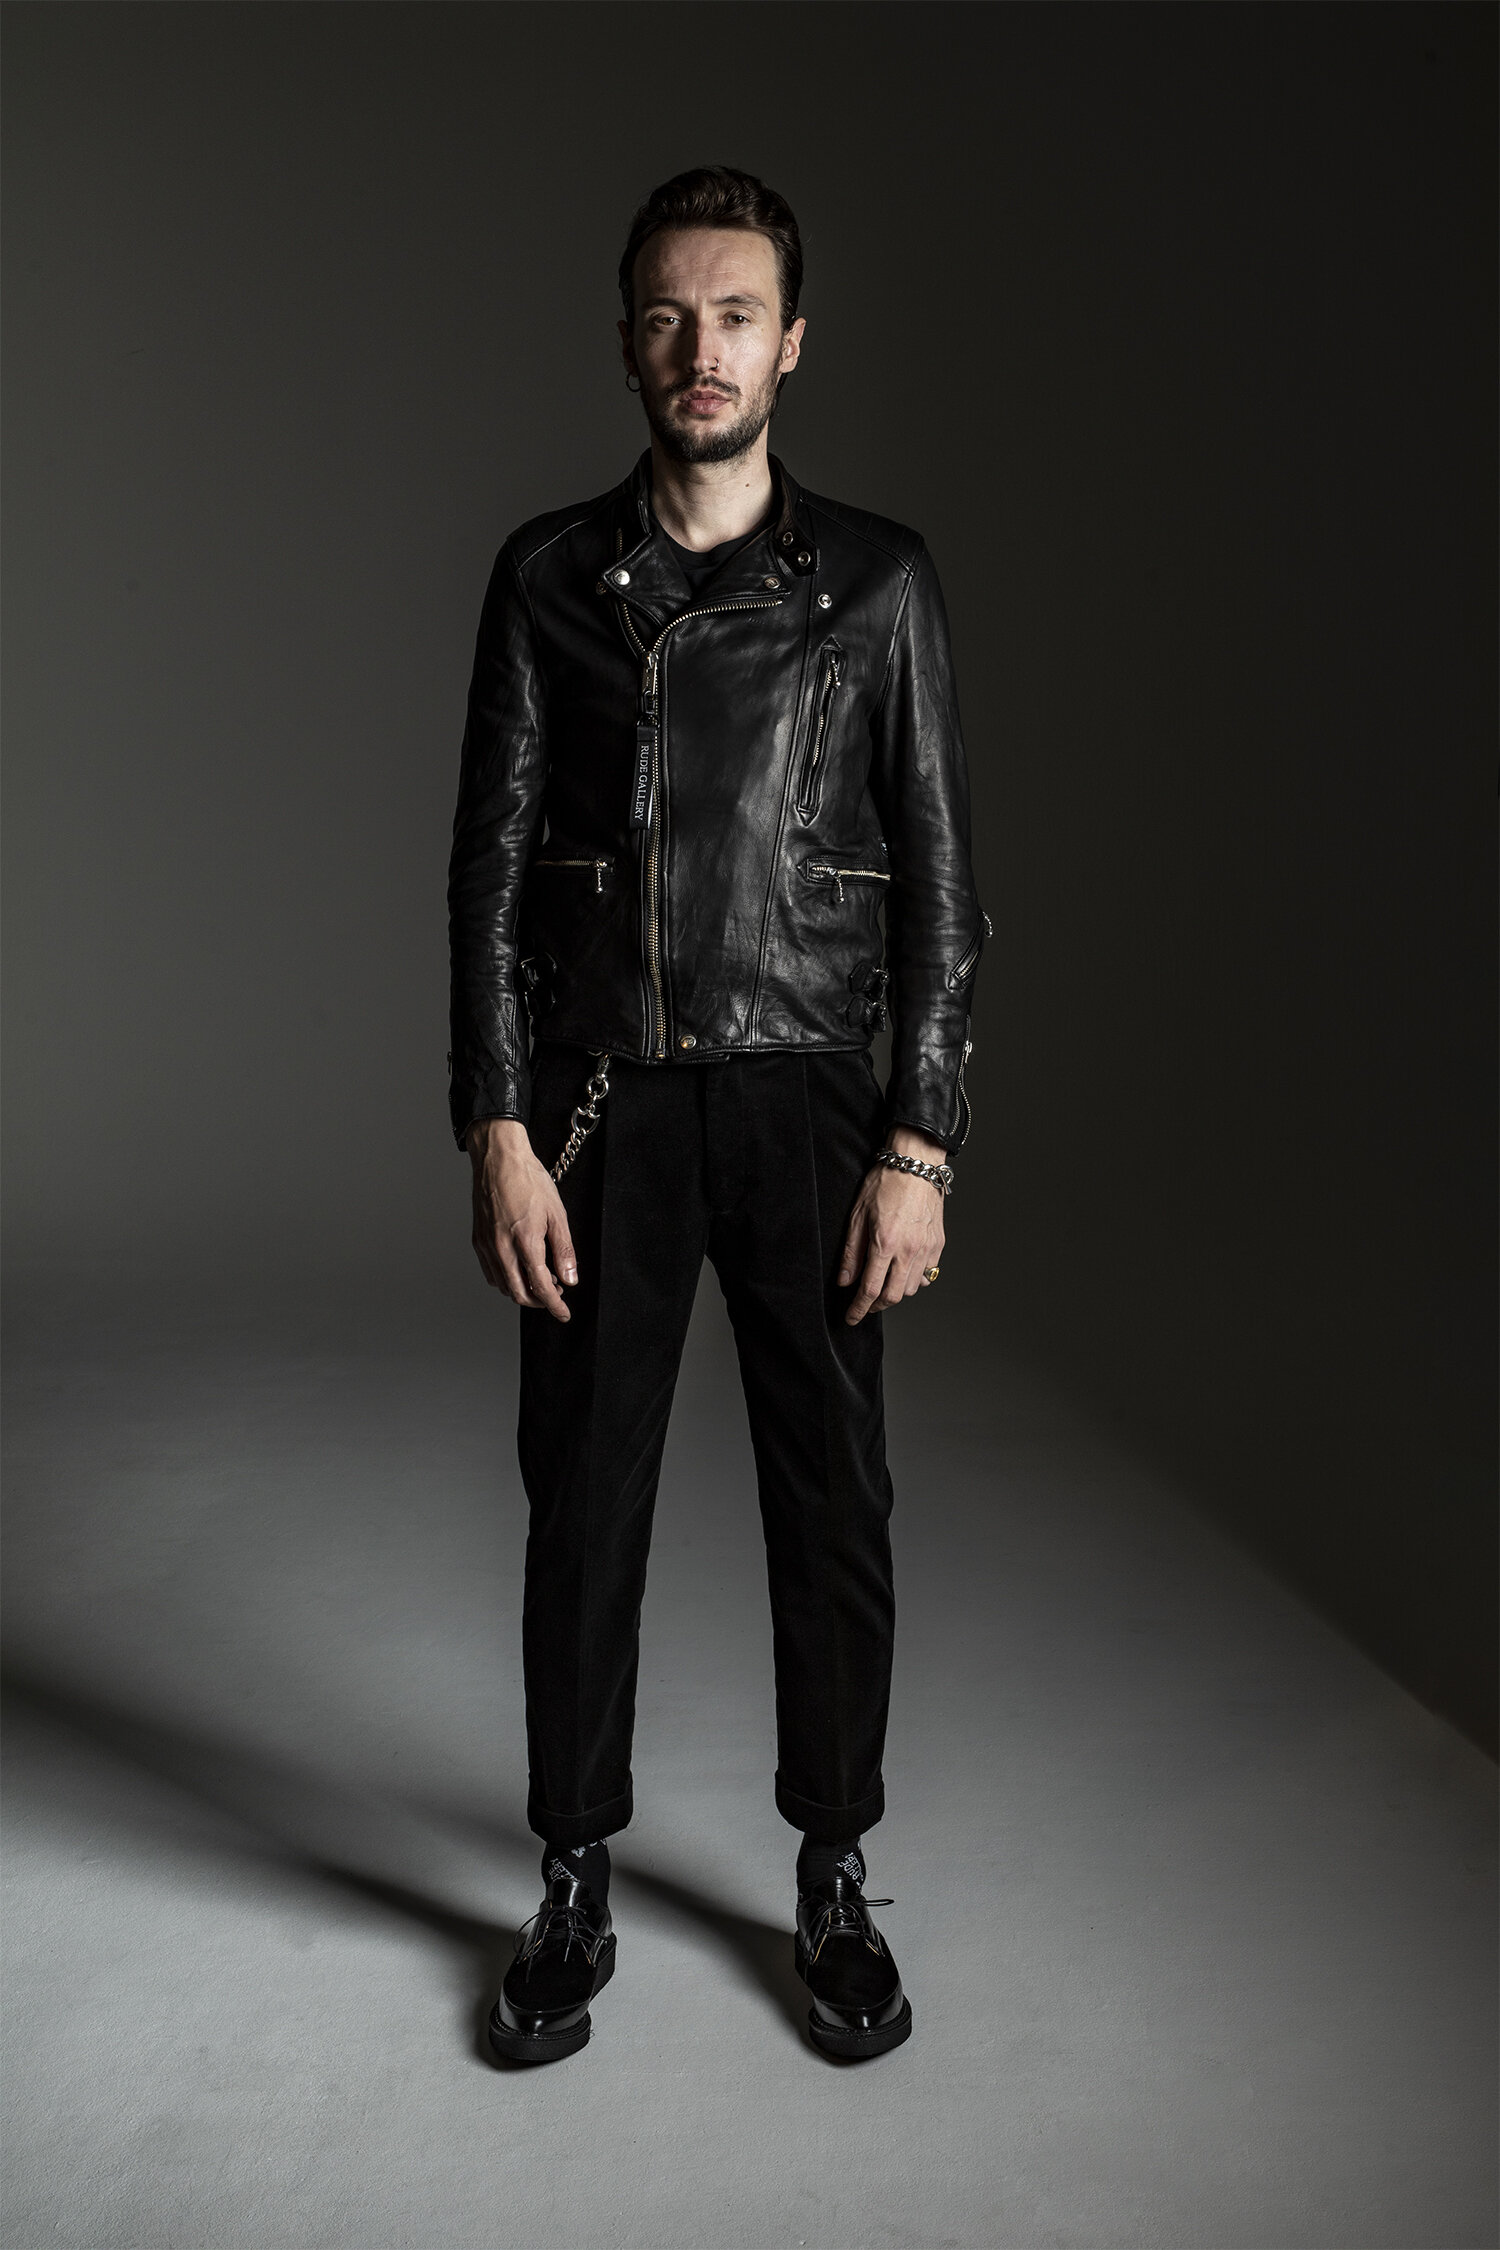 Leather Jacket 2021 - RUDE GALLERY OFFICIAL WEBSITE